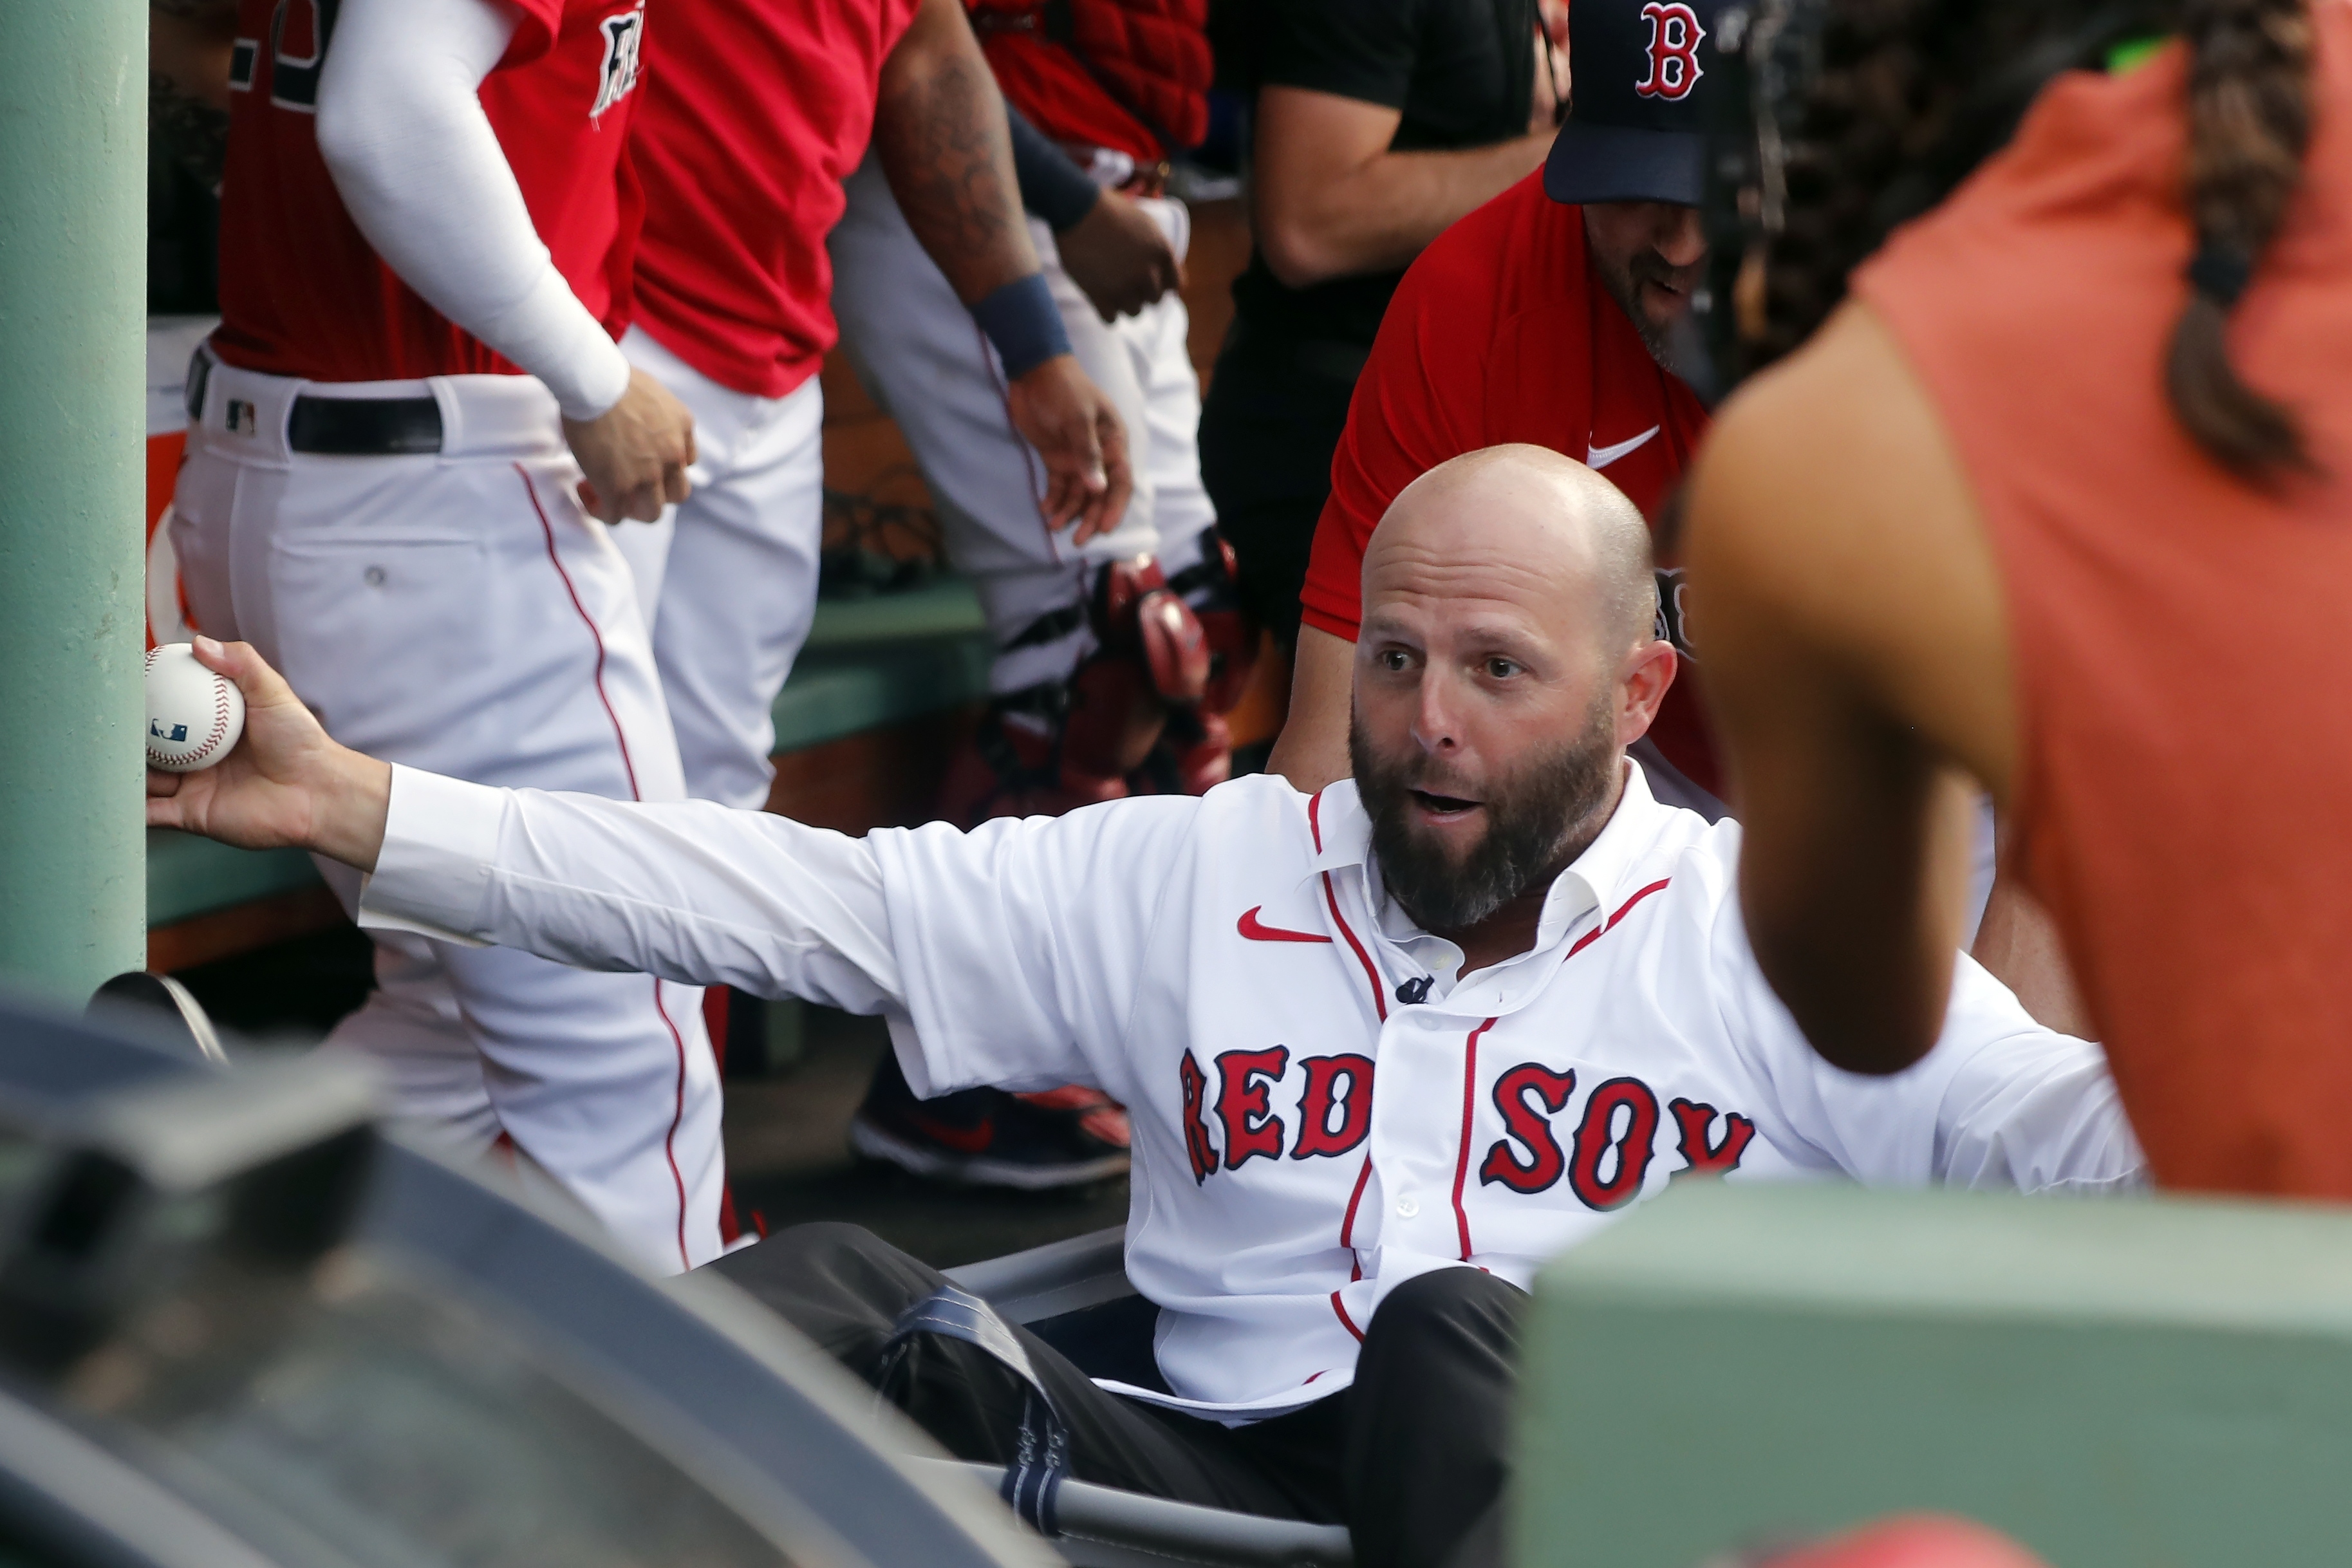 MLB: Dustin Pedroia, Red Sox's longtime keystone, may never play again